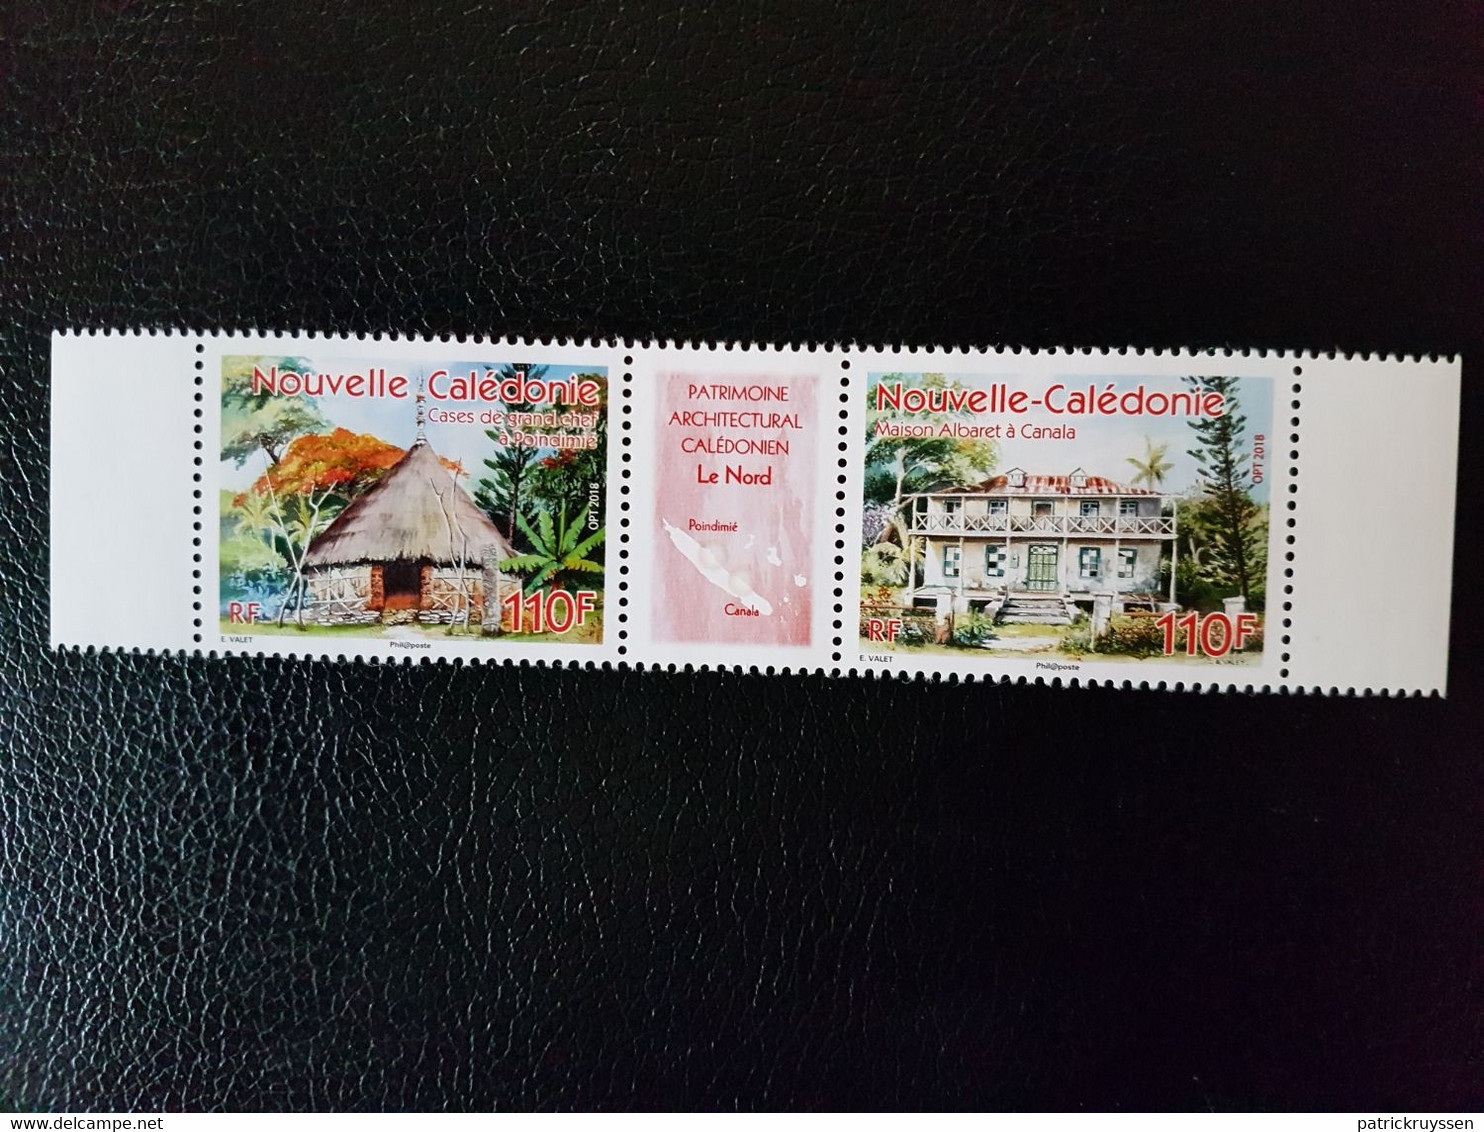 Caledonia 2018 Caledonie House Architecture Cases LE NORD Trees Palm 2v Str Mnh - Unused Stamps